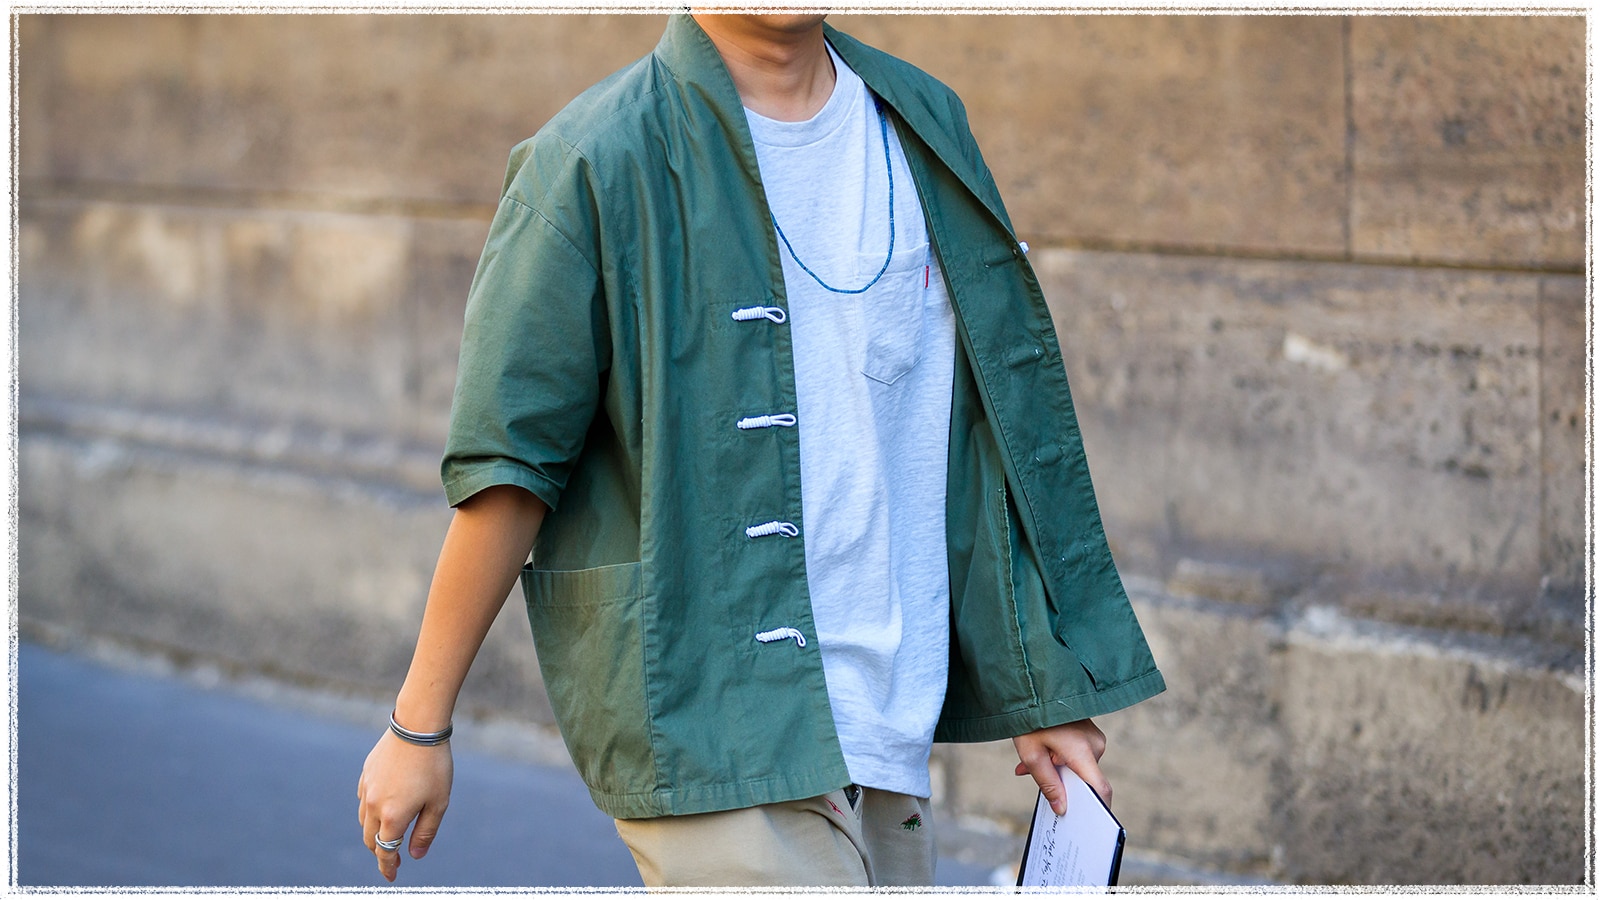 Why The Kimono-Style Jacket Is Having A Menswear Moment, The Journal